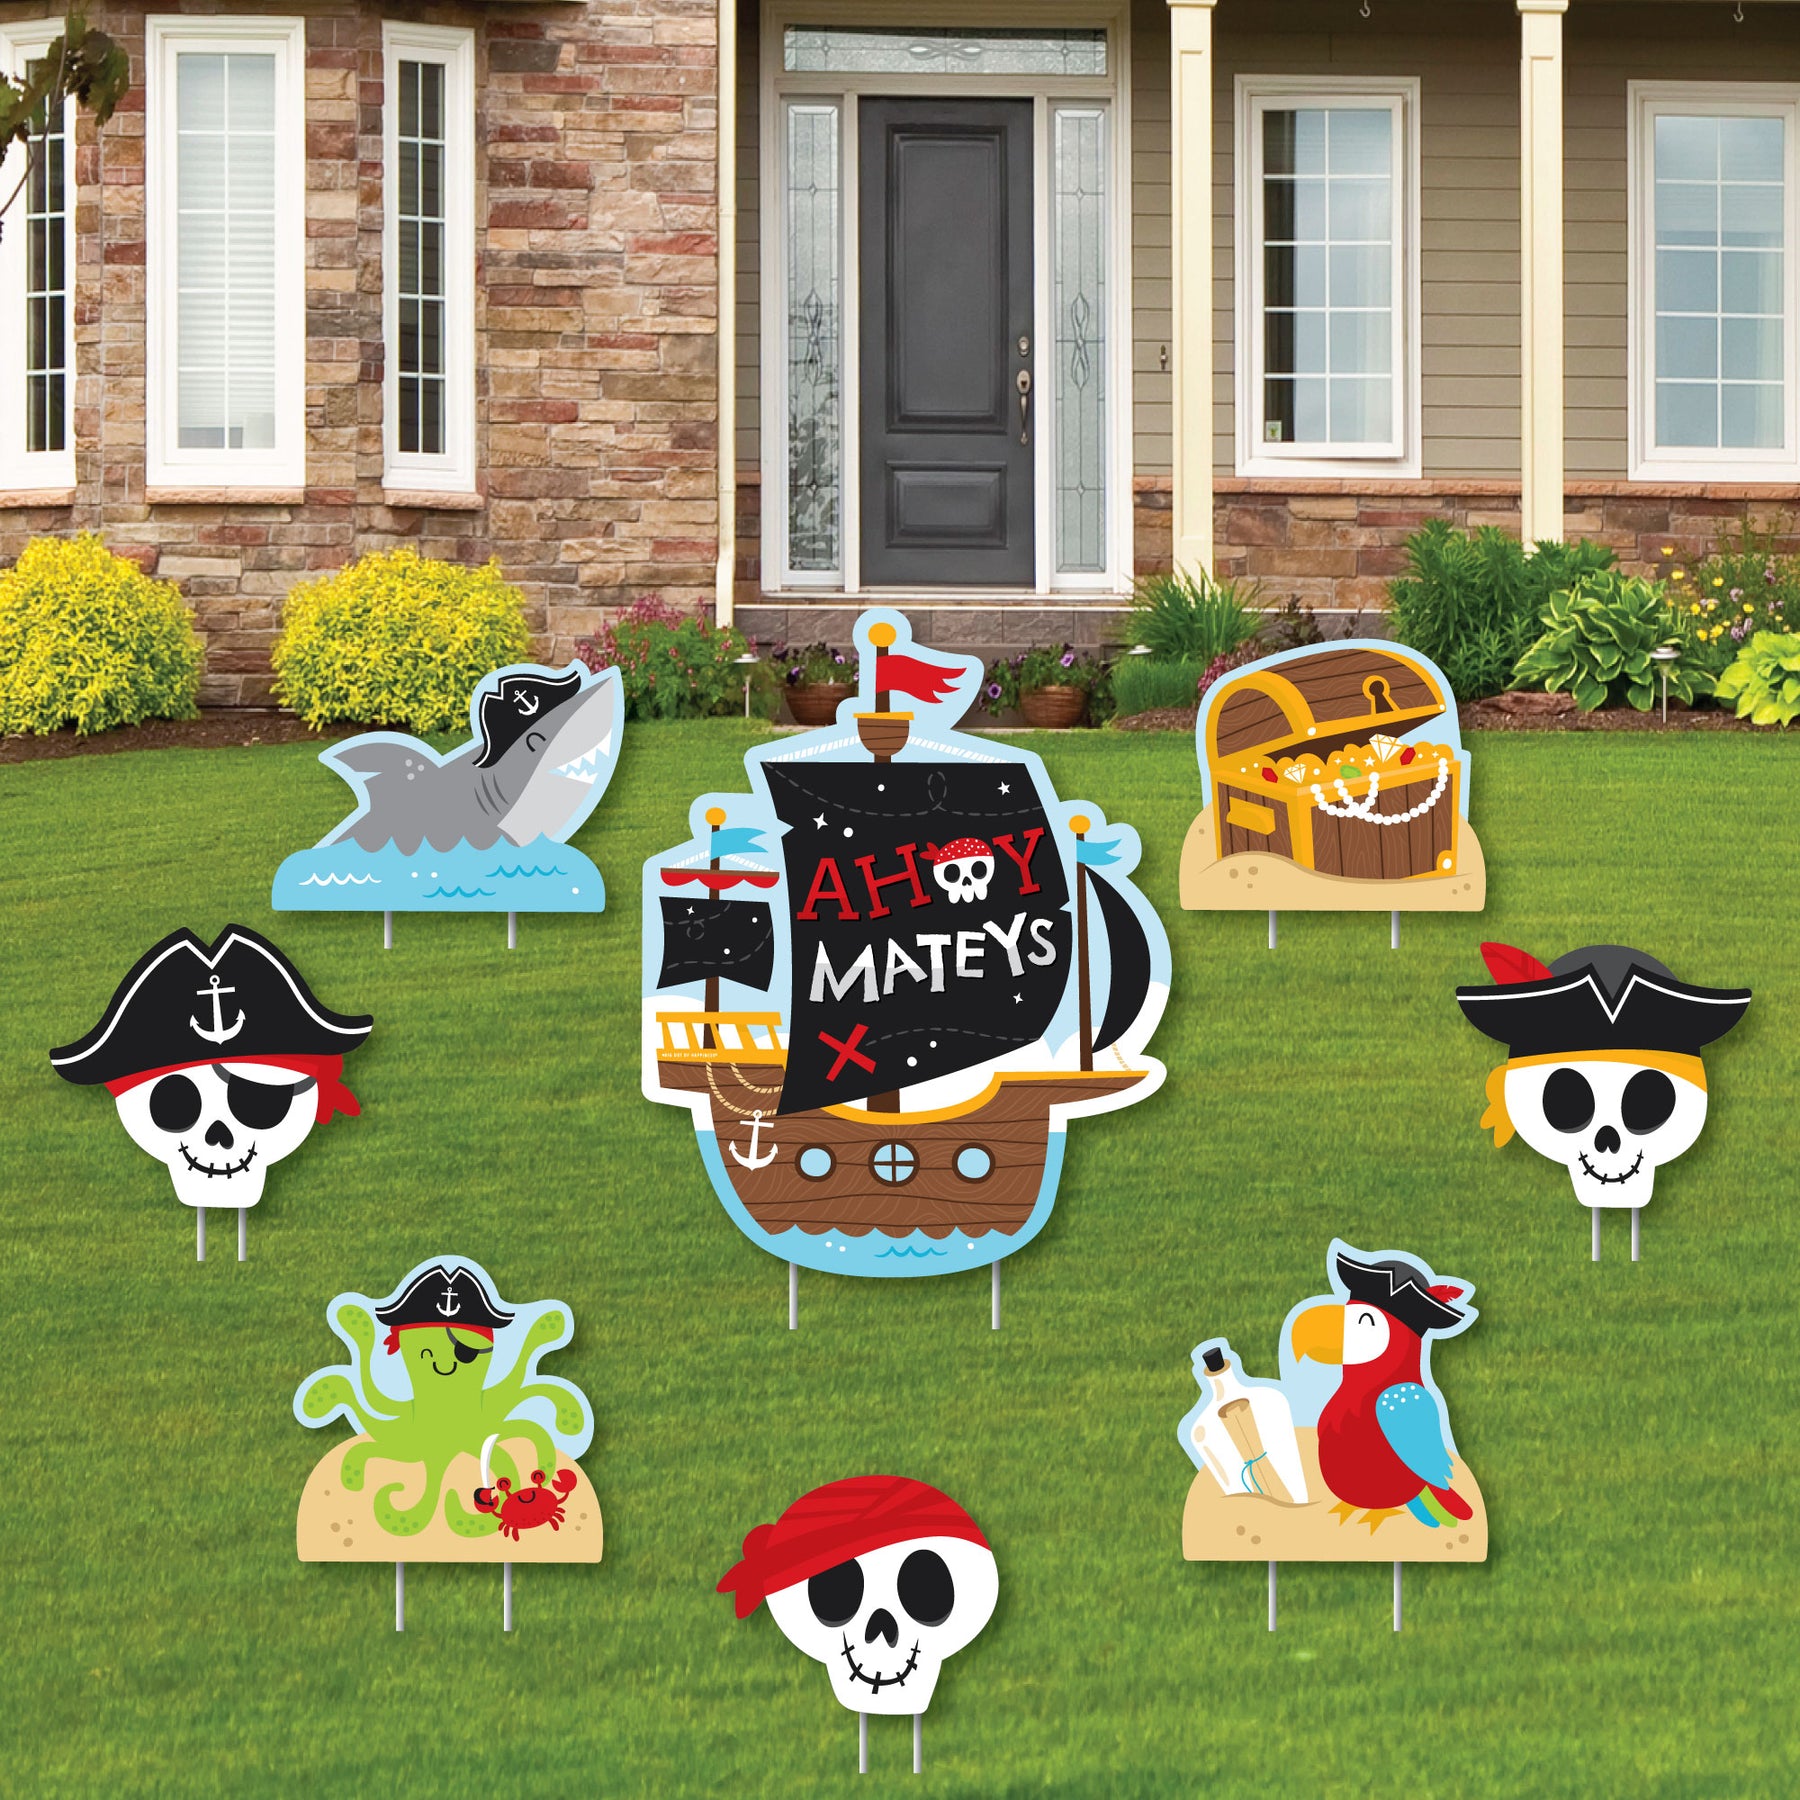 Pirate Ship Adventures - Yard Sign and Outdoor Lawn Decorations